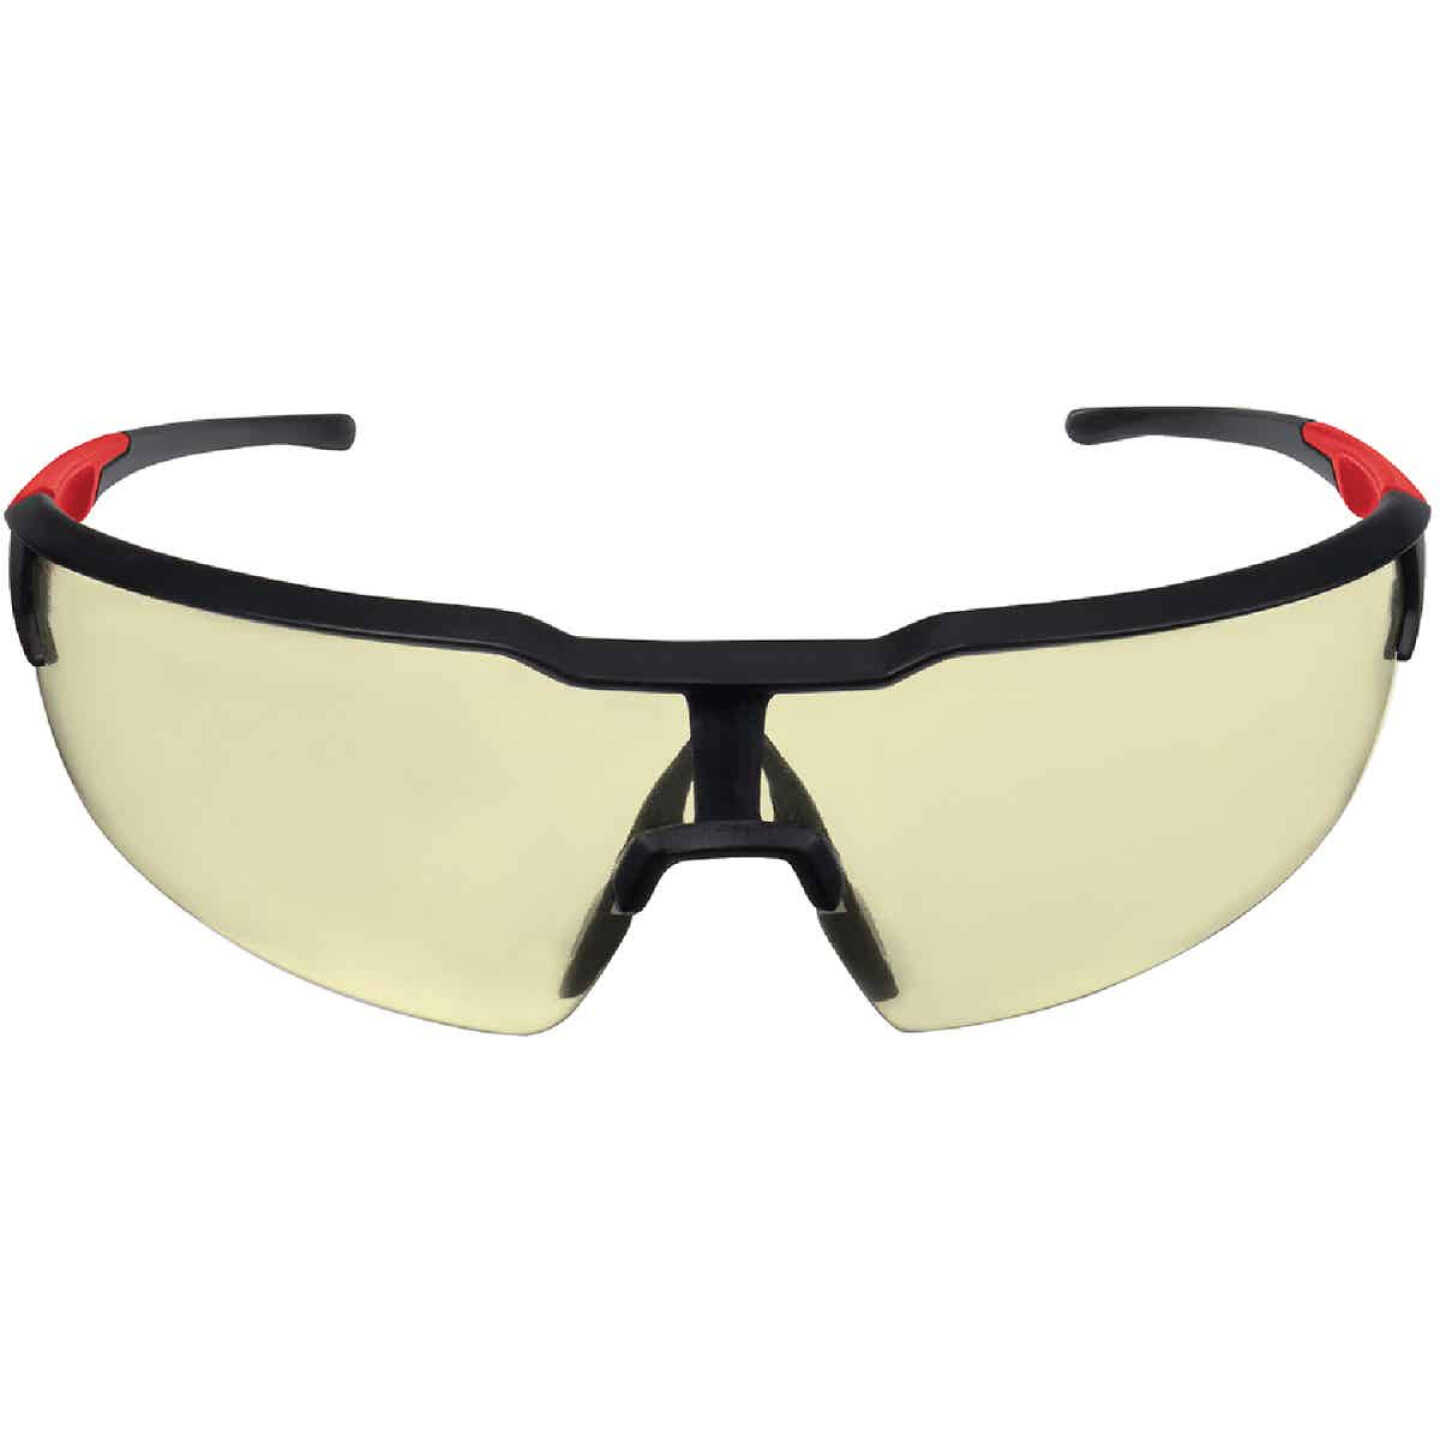 Milwaukee Red & Black Frame Safety Glasses with Yellow Fog-Free Lenses Image 1